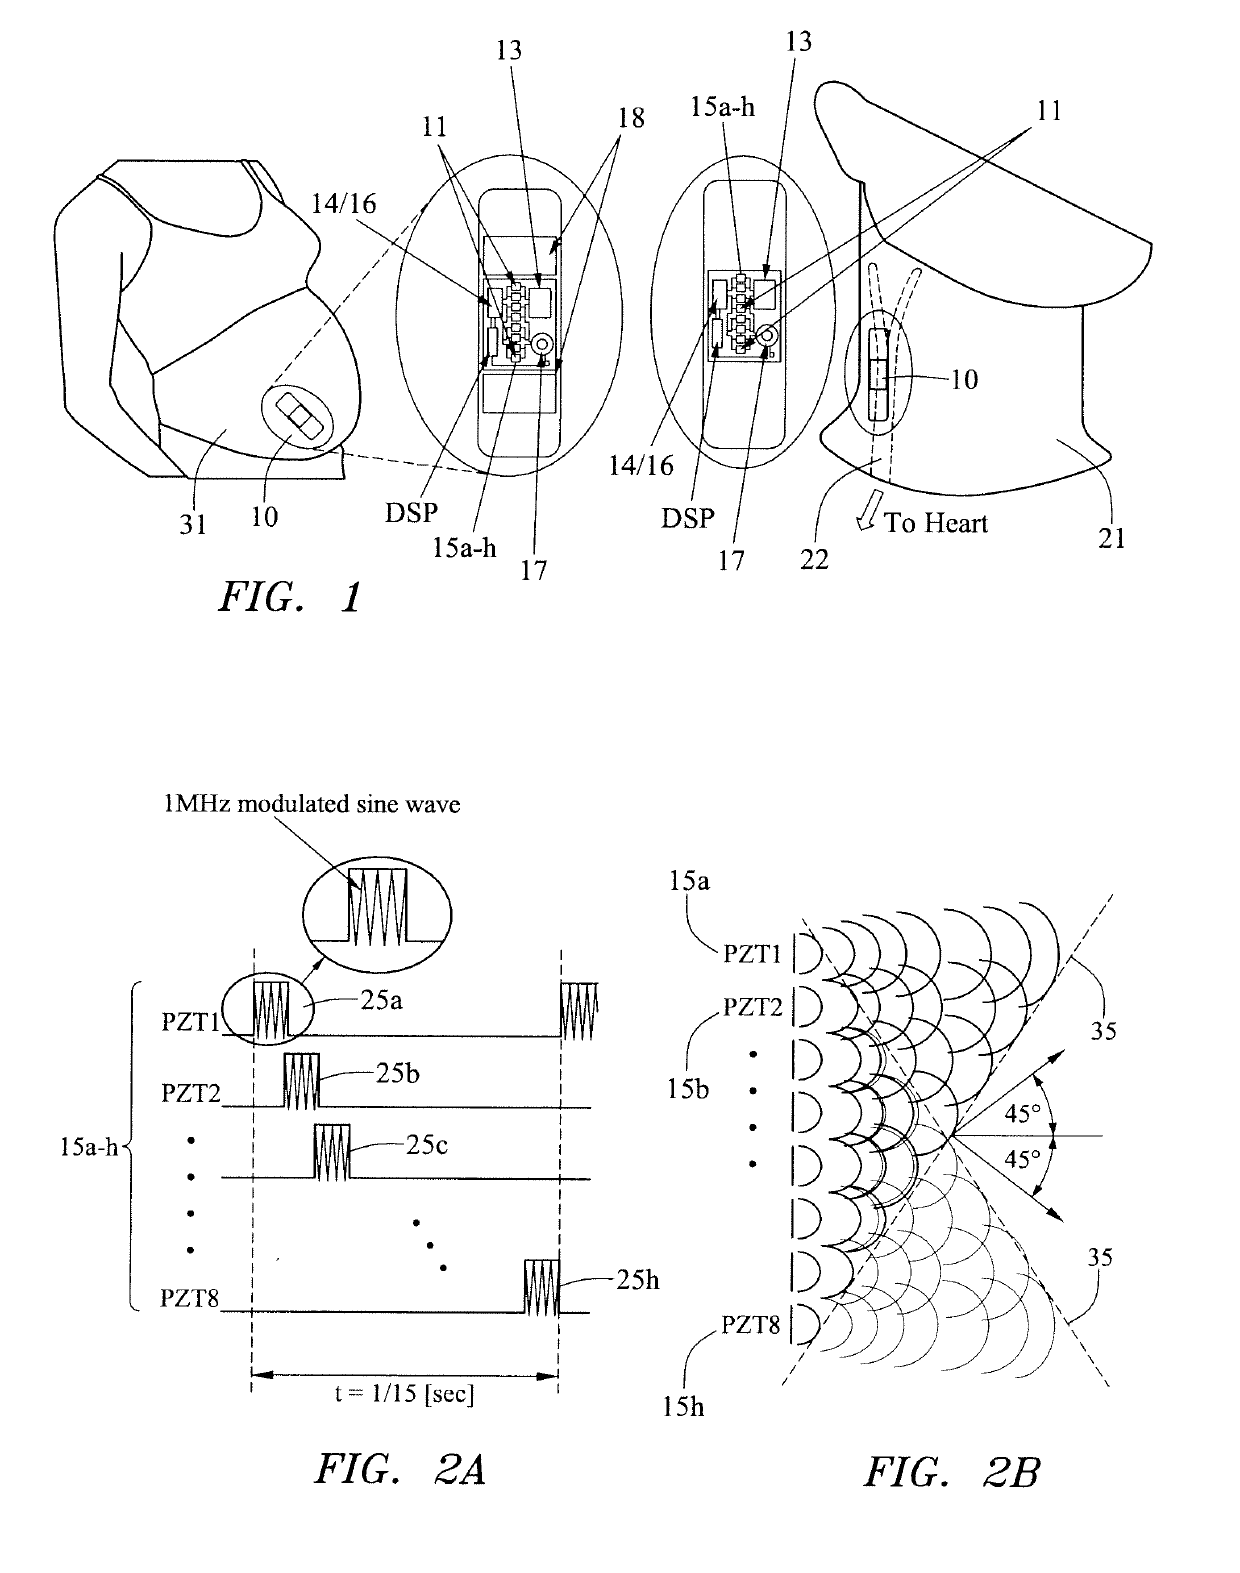 Integrated wearable device for detection of fetal heart rate and material uterine contractions with wireless communication capability